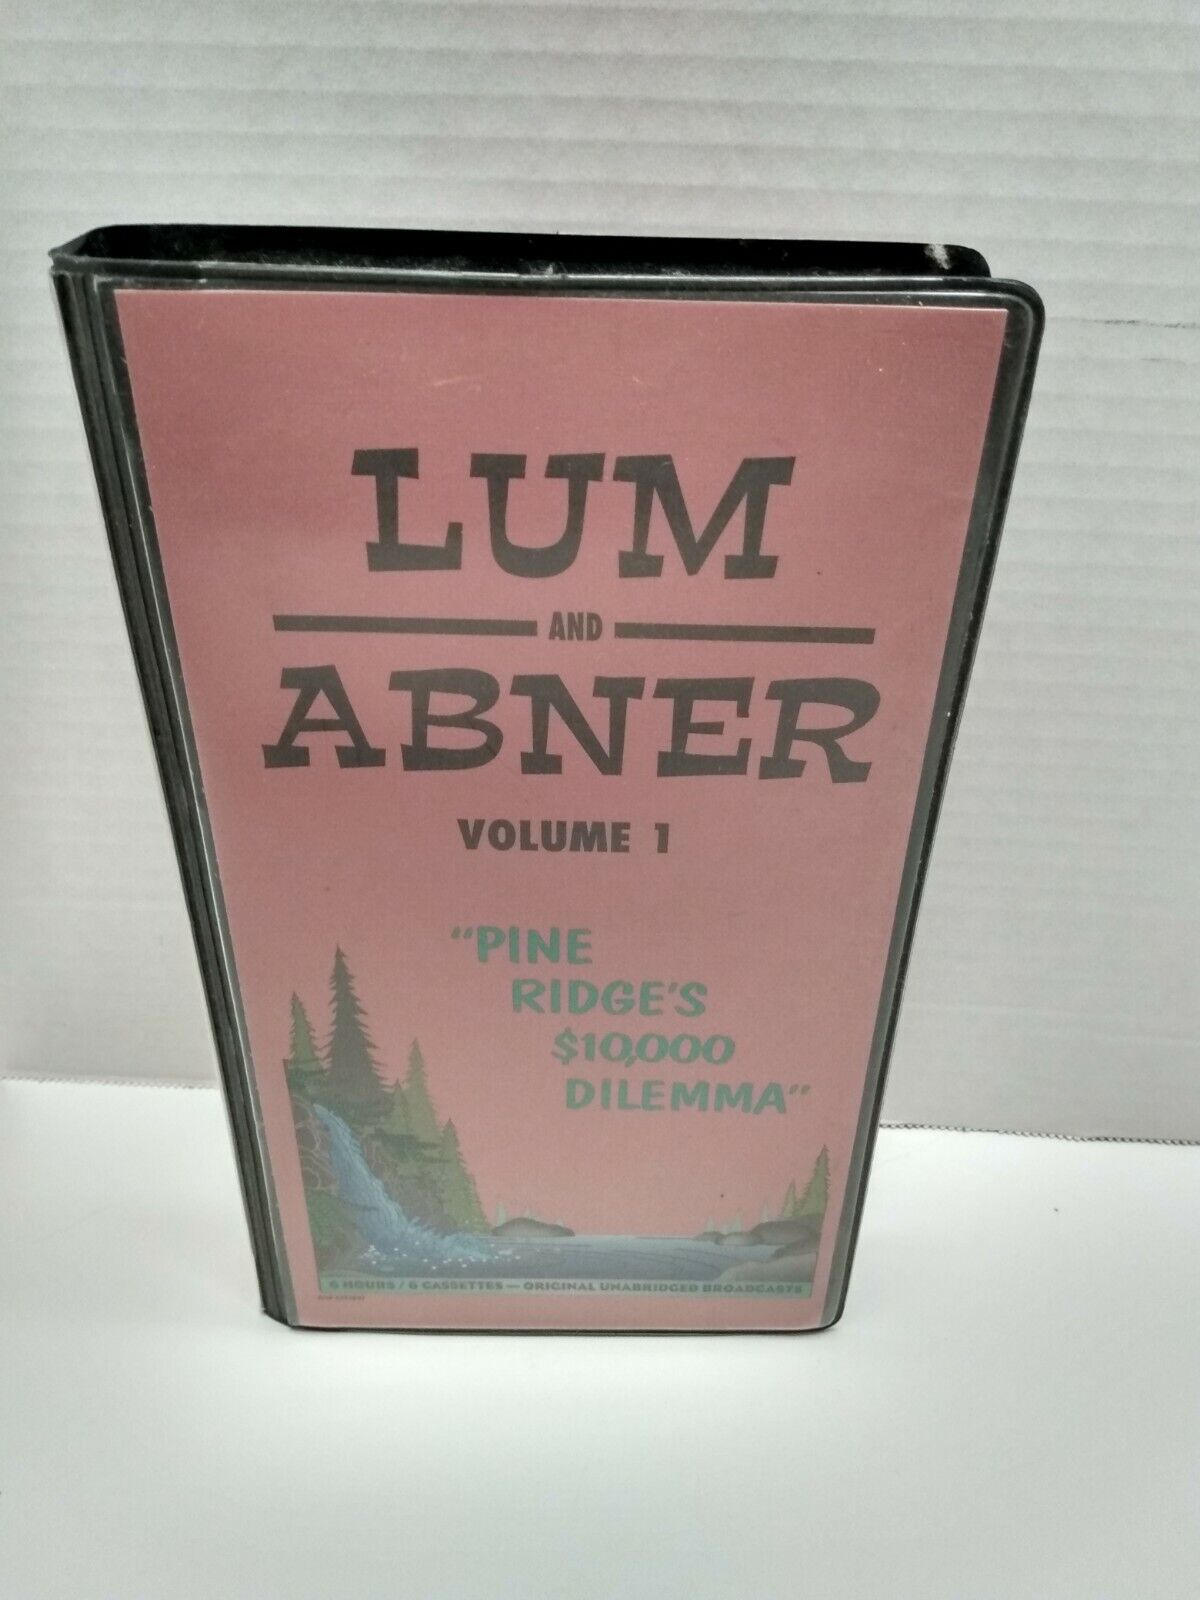 Lum and Abner Vol 1 and Vol 1(6) Cassettes Radio Comedy